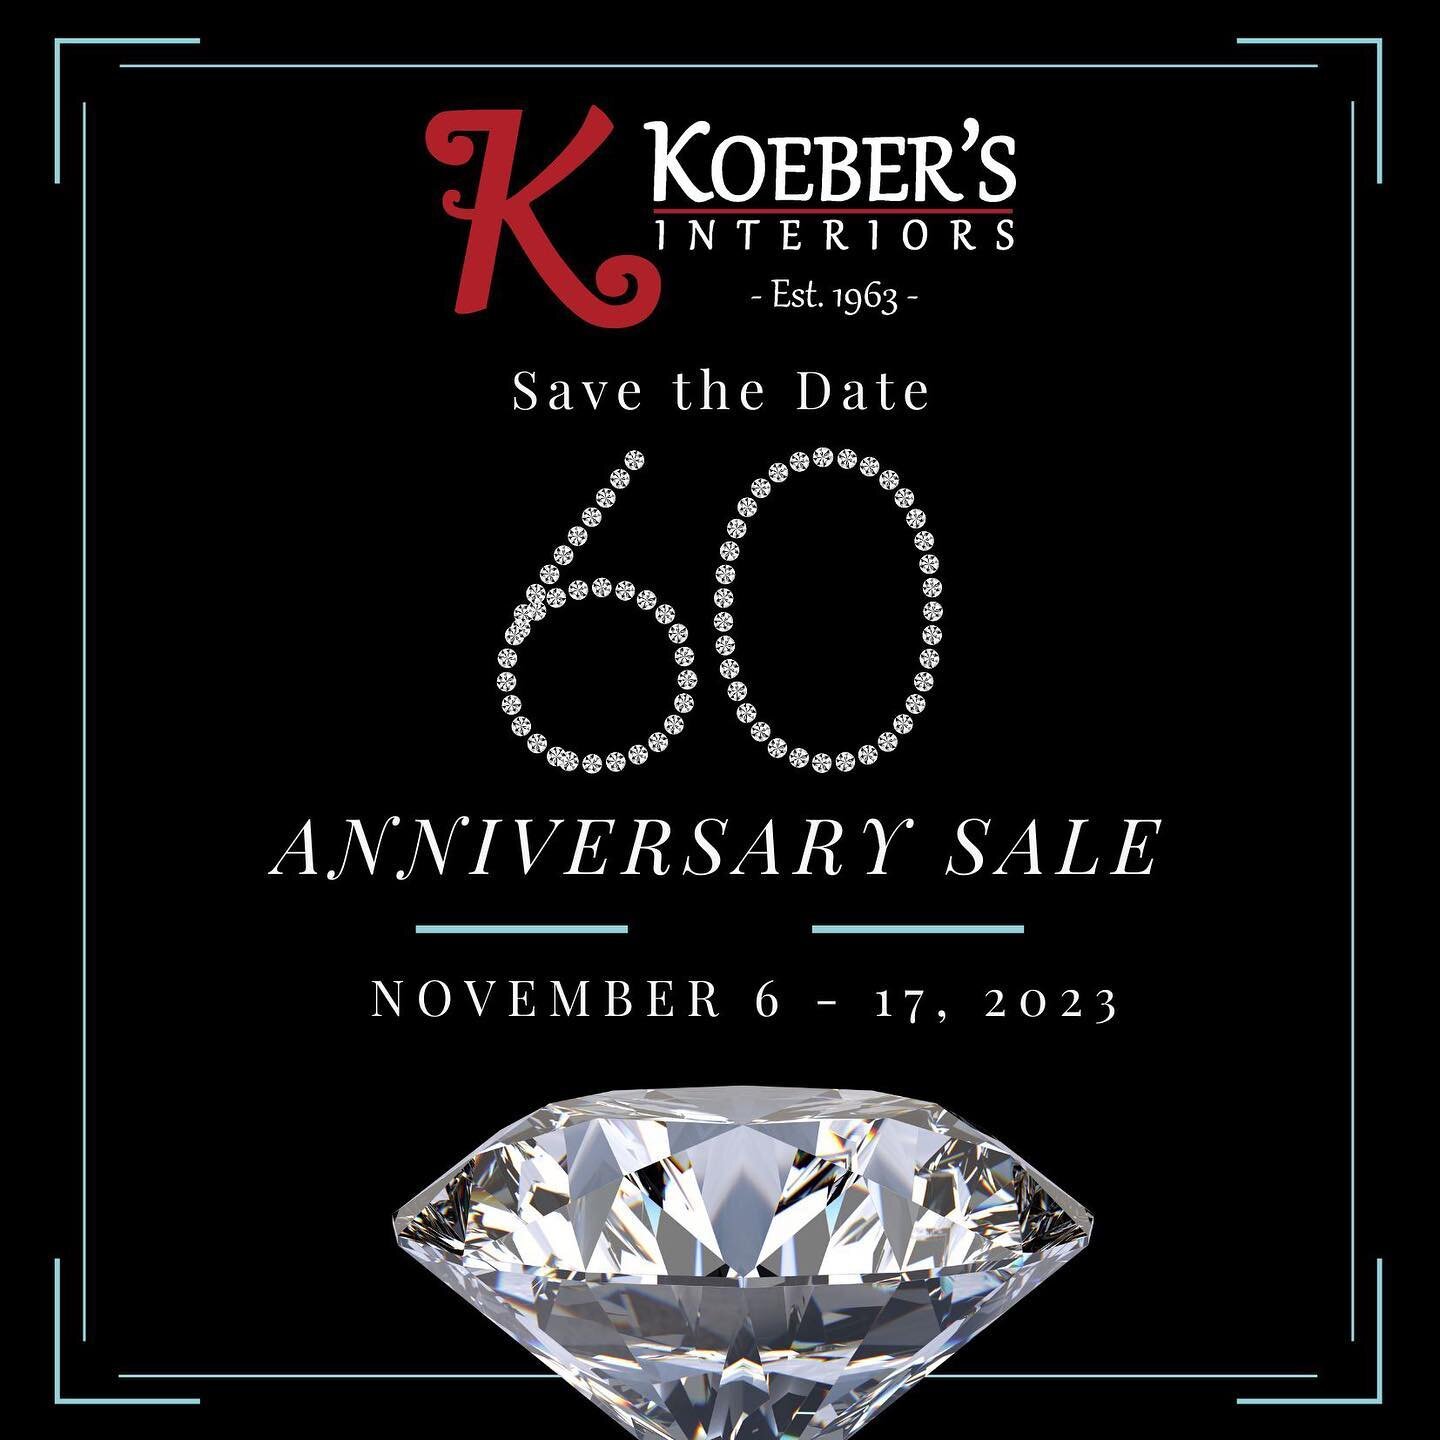 Save the Date: Nov. 6-17th ✨ 
We are turning 60, so we&rsquo;re giving you a sale! Look for these items on sale&hellip;
💎 Carpet 
💎 Hardwood
💎 Luxury Vinyl Flooring
💎 Window Coverings
#flooring #flooringsale #shoplocal #remodel #fallsale #anniver